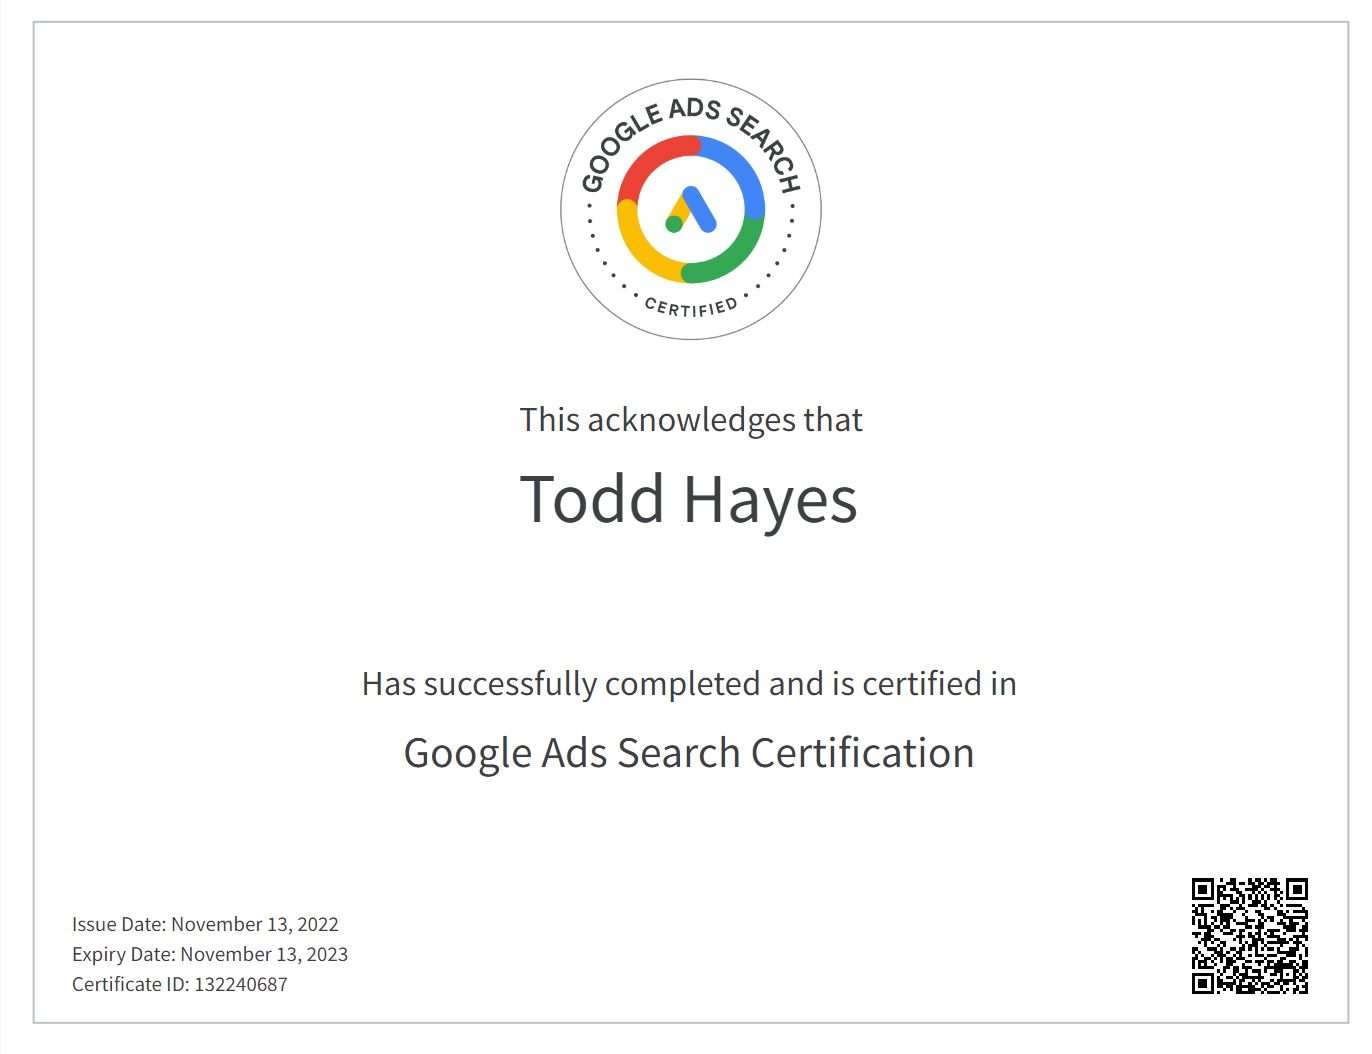 Google certificate and credentials